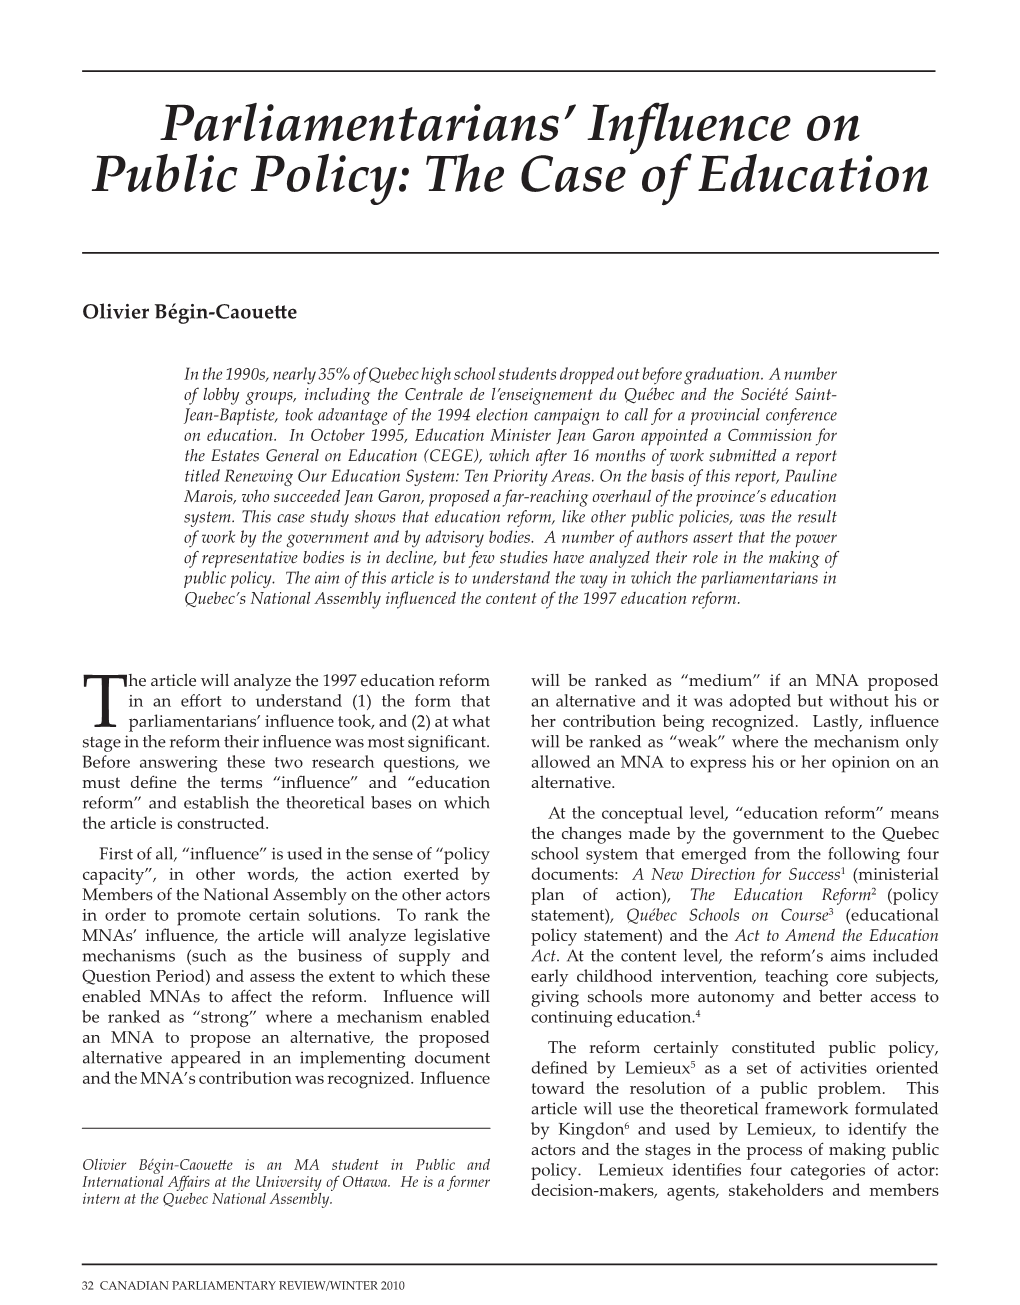 Parliamentarians' Influence on Public Policy: the Case of Education